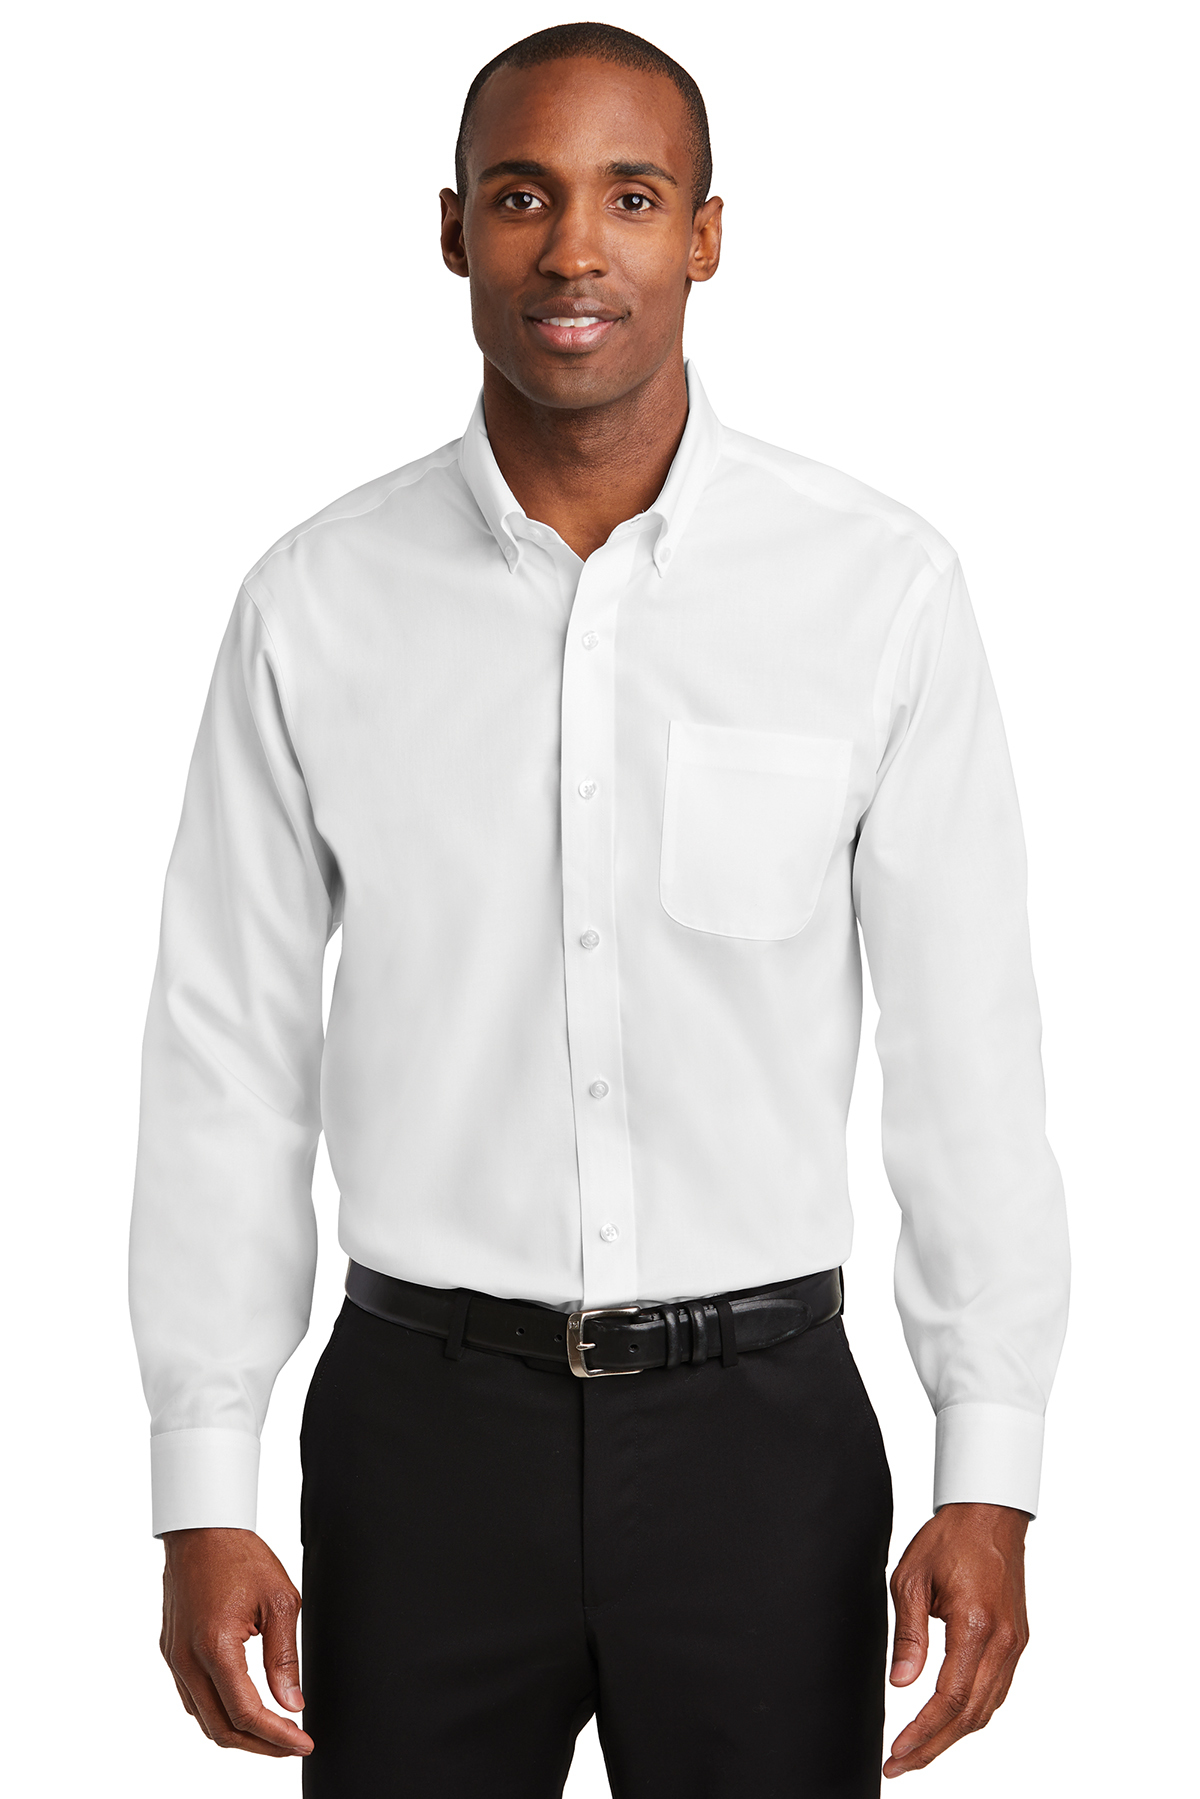 Red House TLRH240 - Men's Tall Pinpoint Oxford Non-Iron Shirt